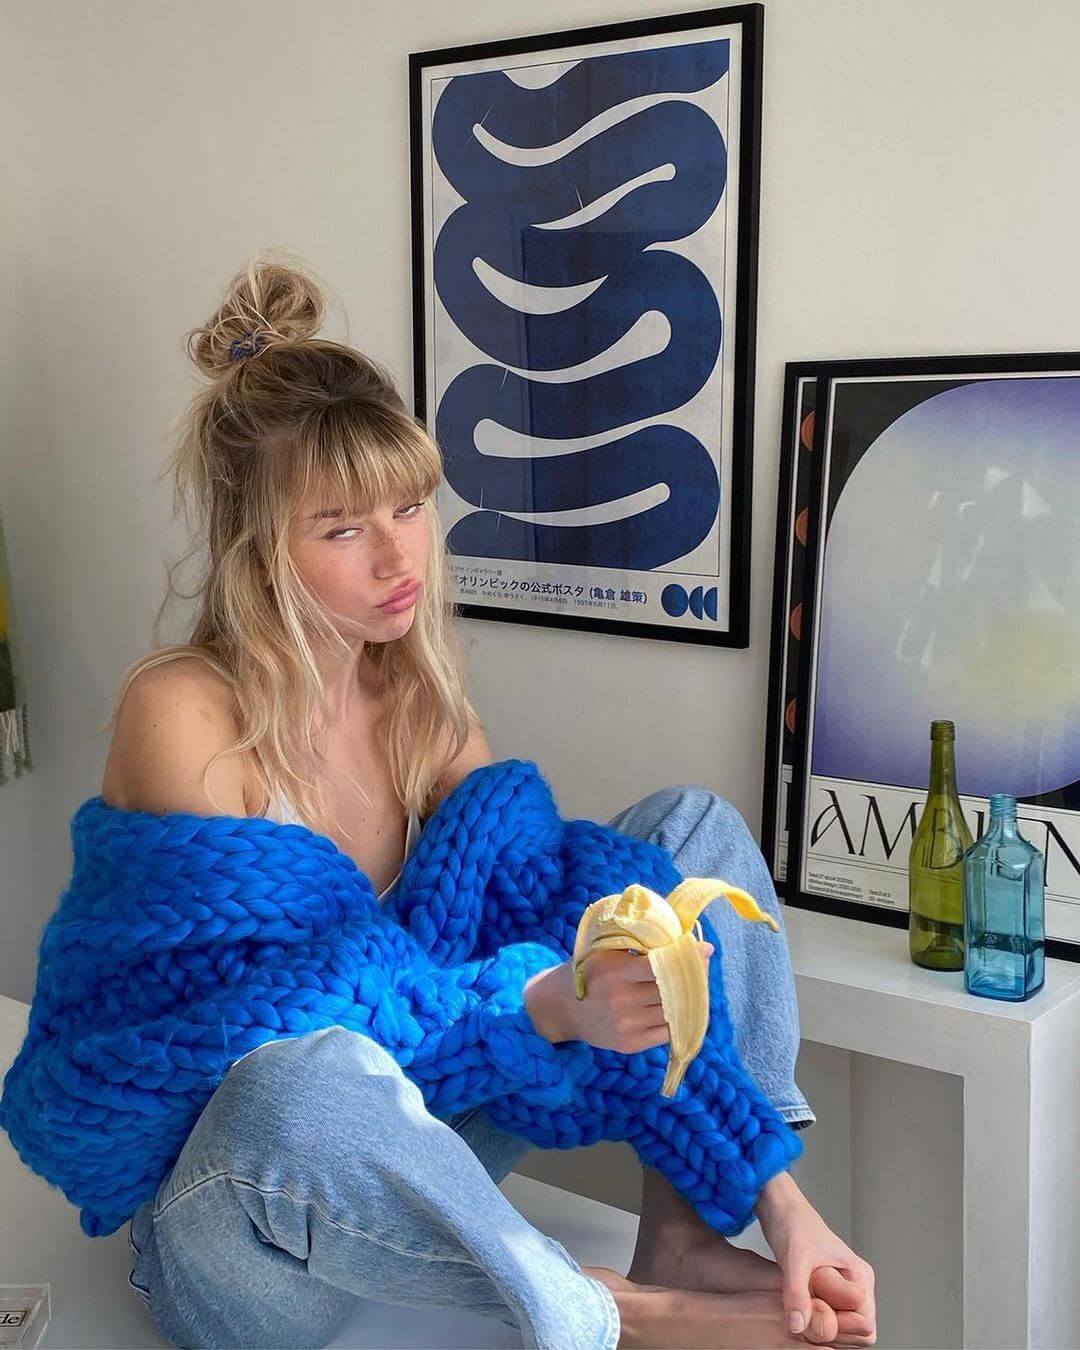 photo of a girl sitting in front of 2 blue framed artworks